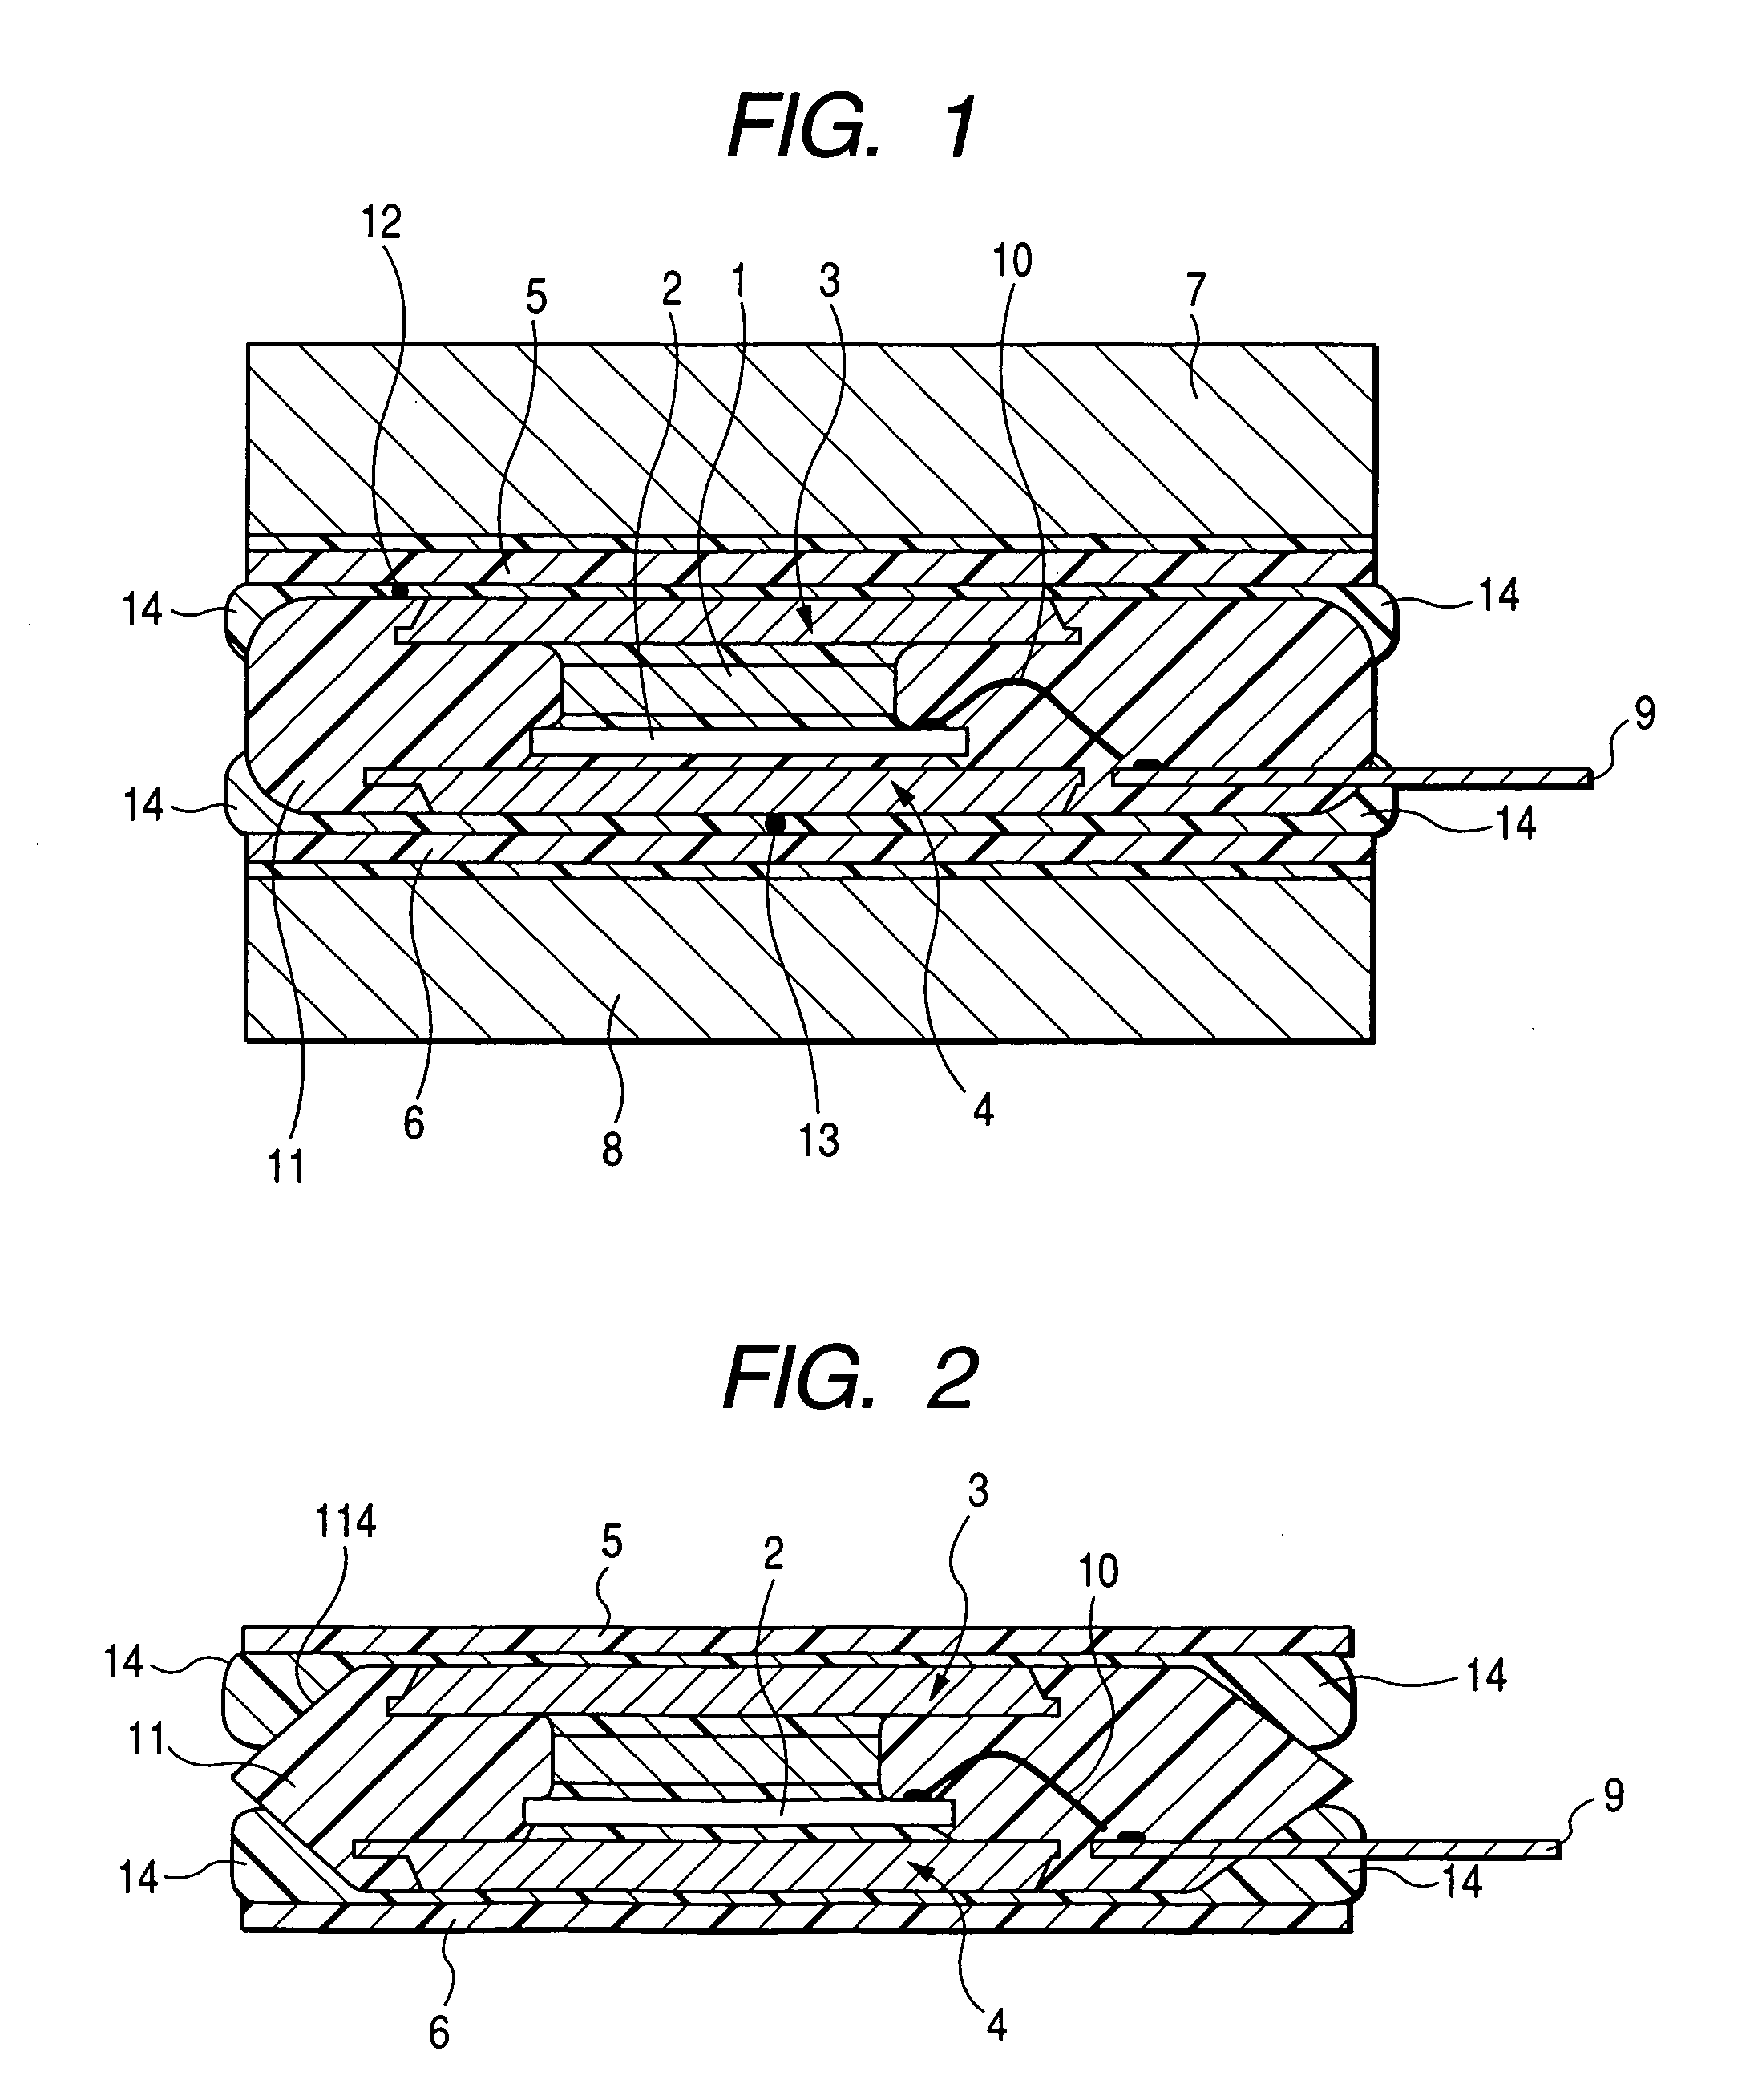 Semiconductor module mounting structure, a cardlike semiconductor module, and heat receiving members bonded to the cardlike semiconductor module